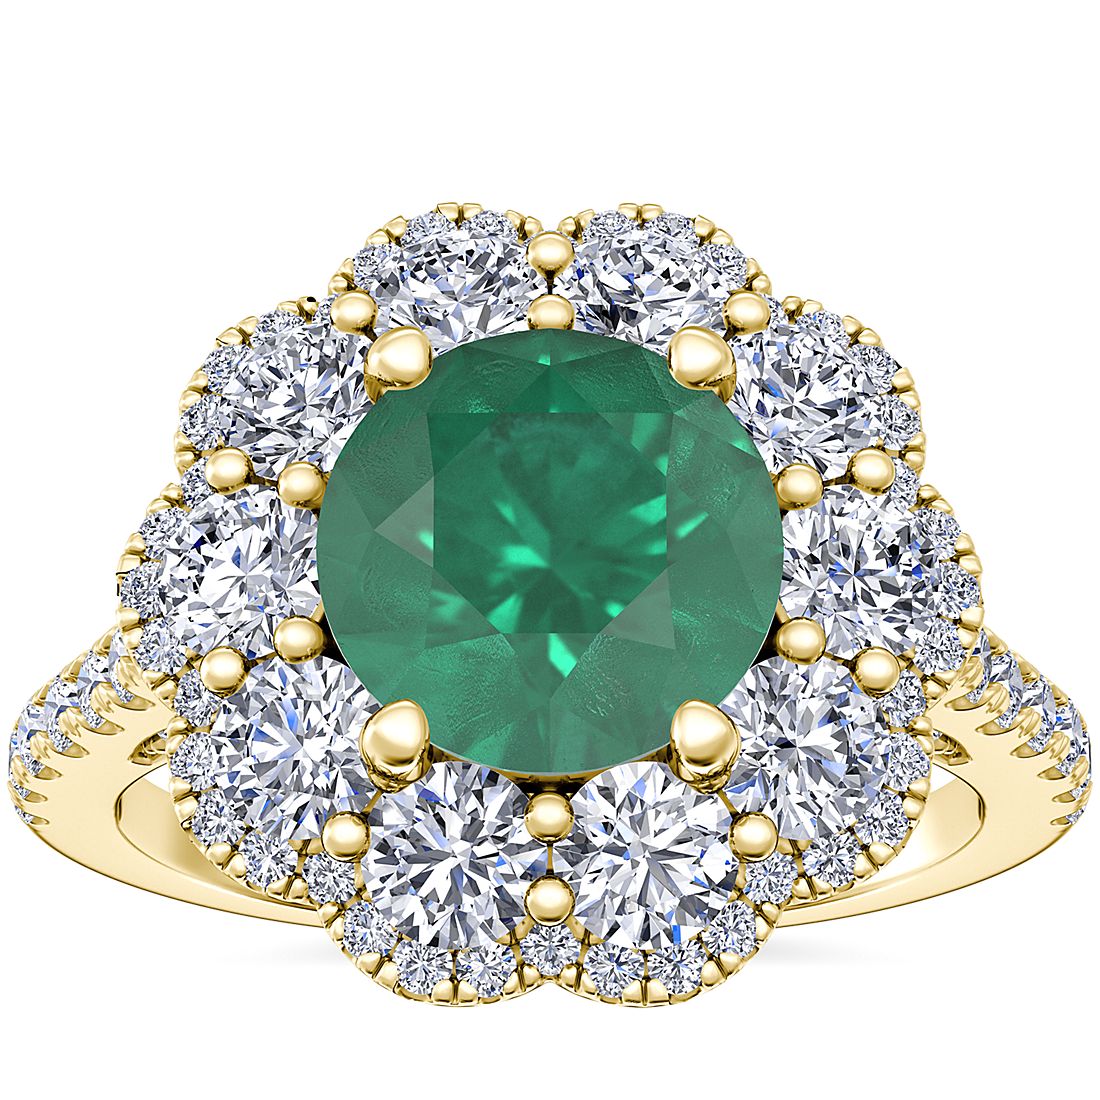 Vintage Diamond Halo Engagement Ring with Round Emerald in 14k Yellow Gold (8mm)